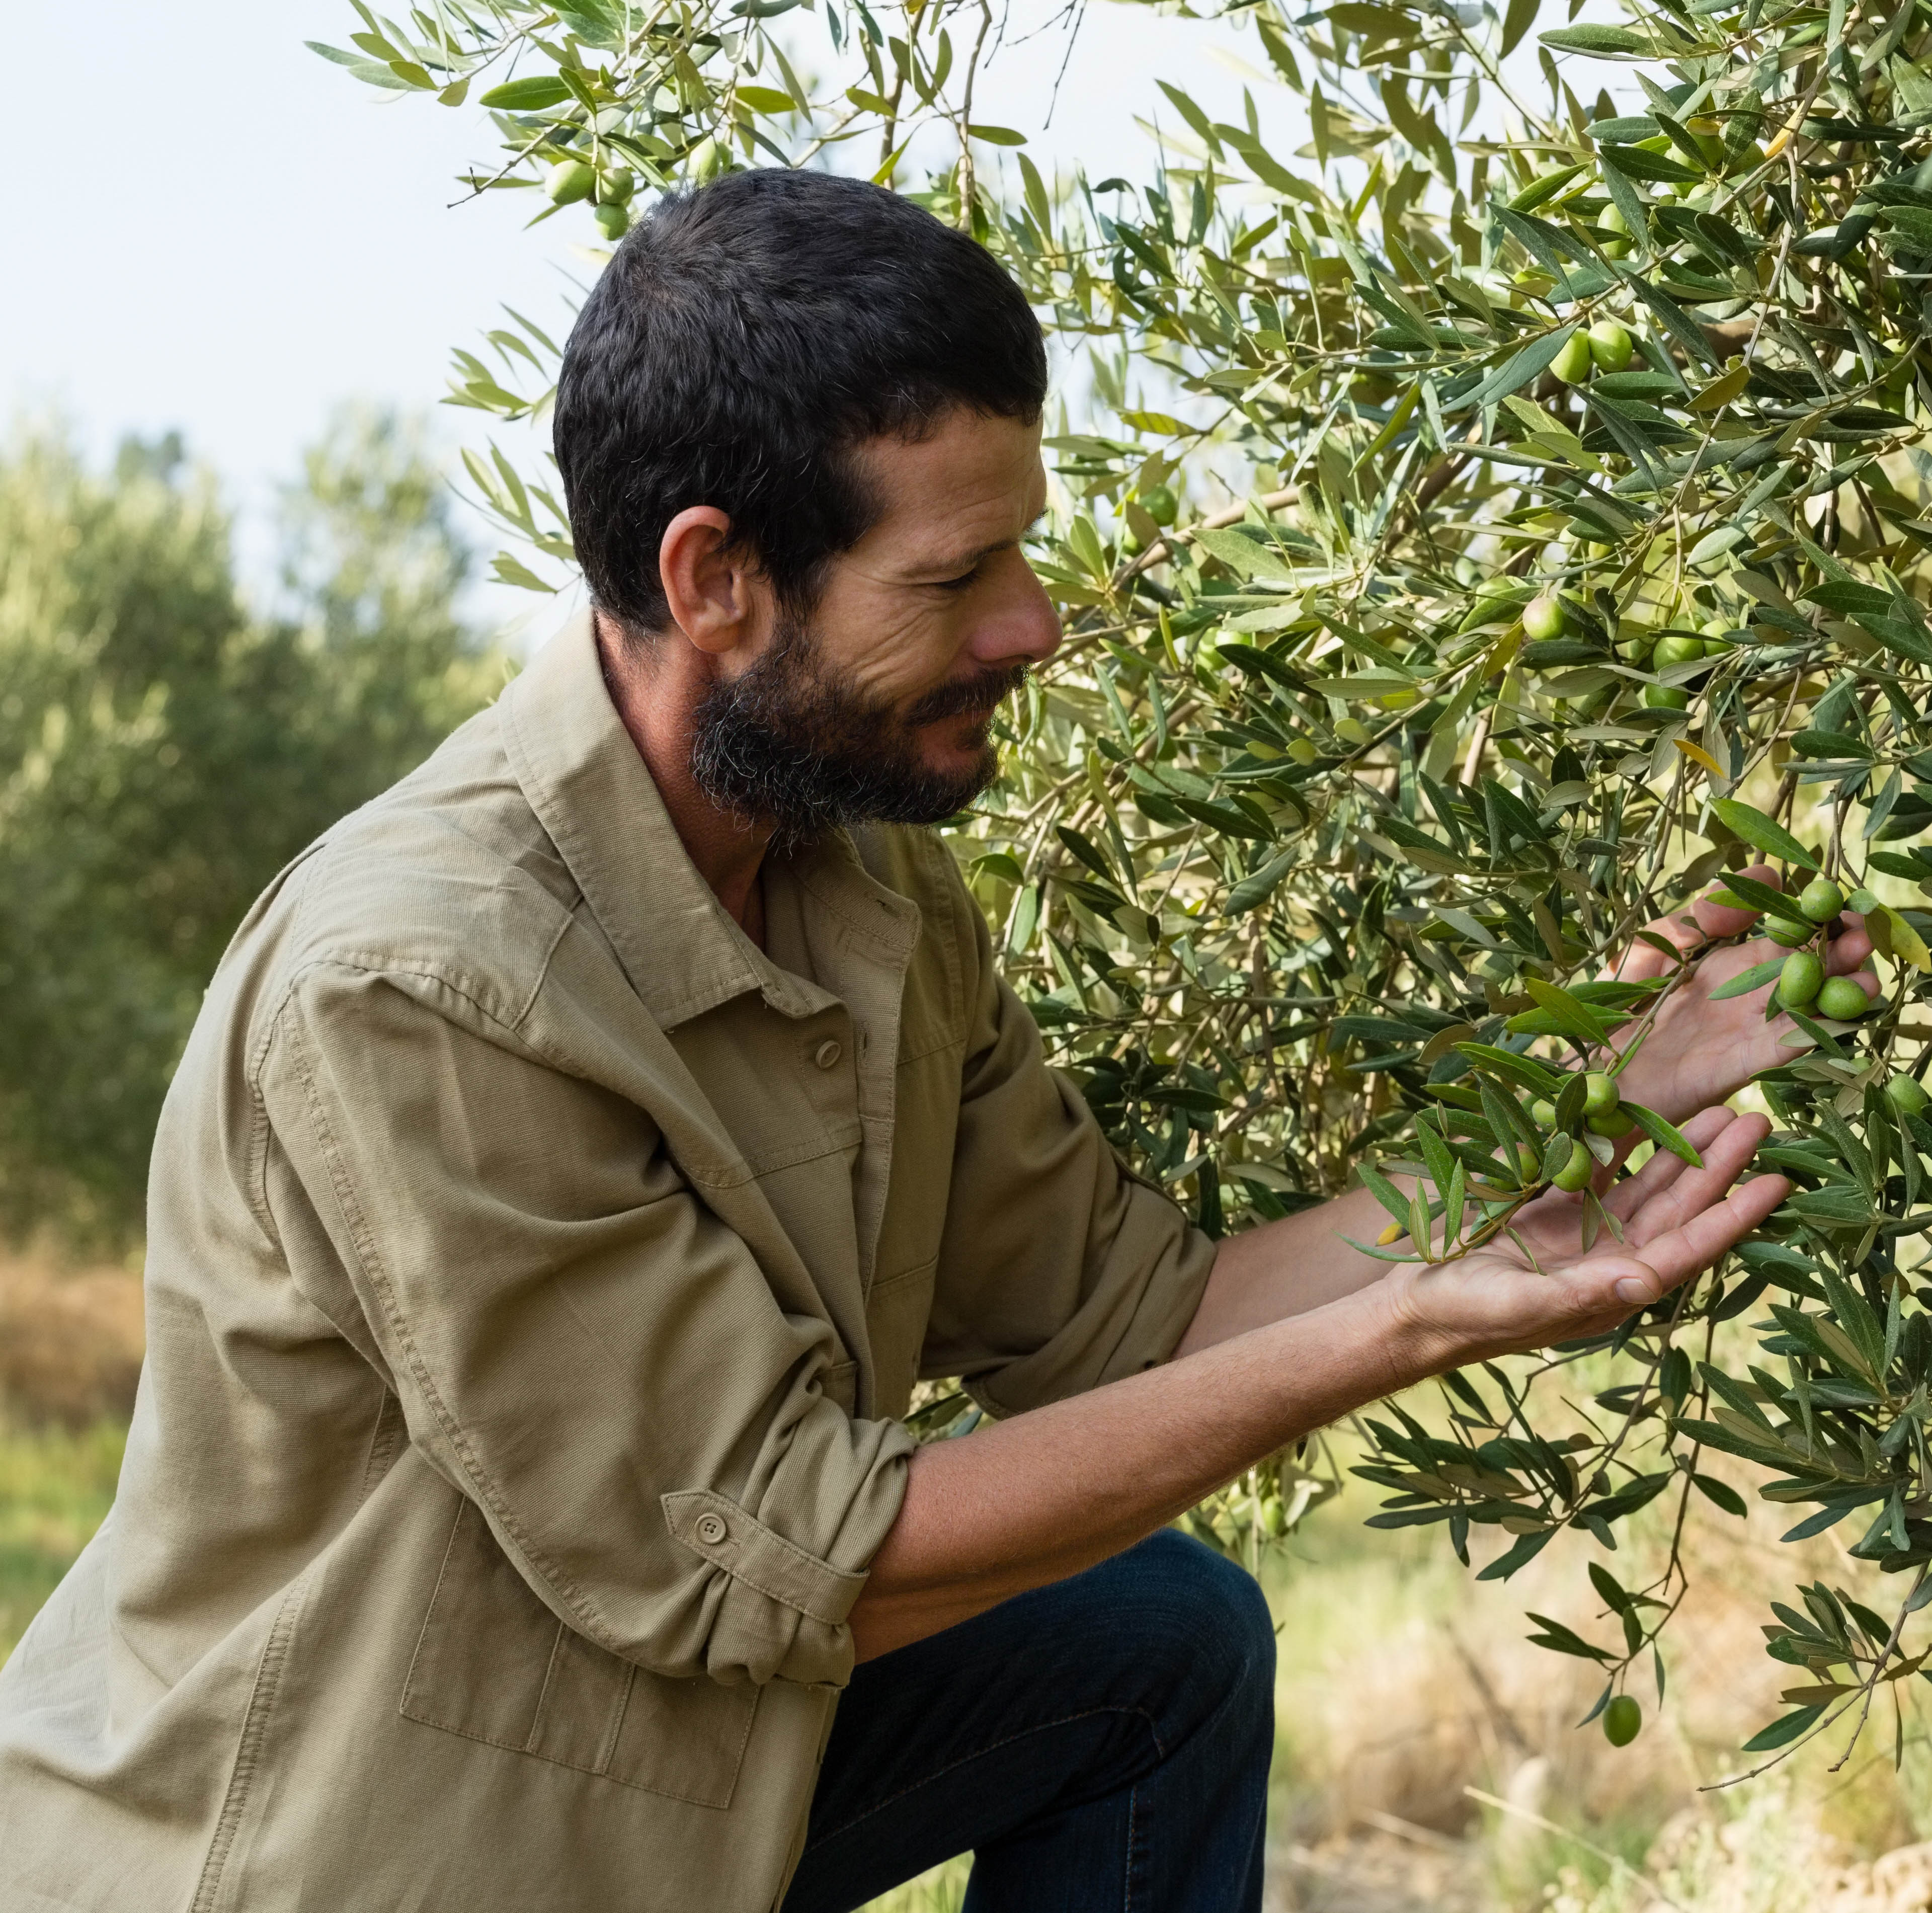 600x600_farmer-checking-a-tree-of-olive-X3F74ZK_edited